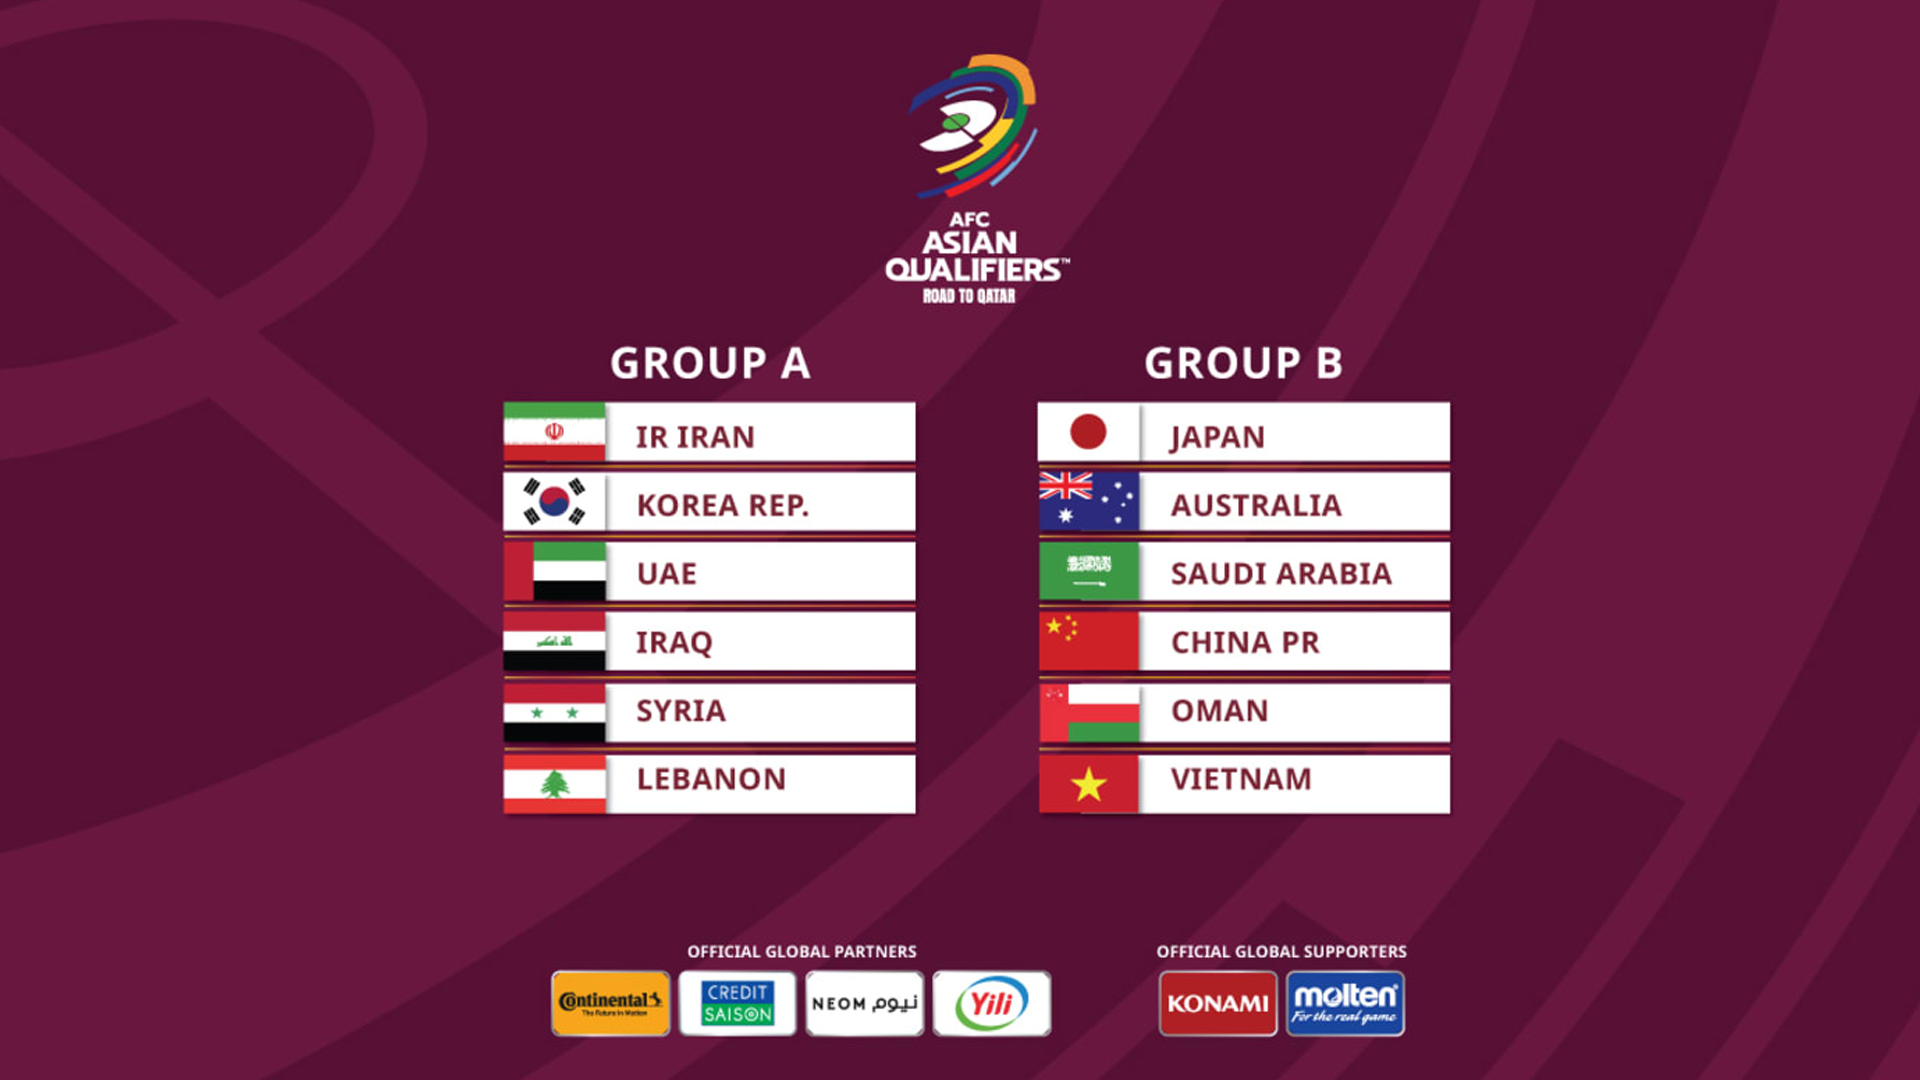 World Cup 2022: AFC Asian qualifiers groups unveiled  